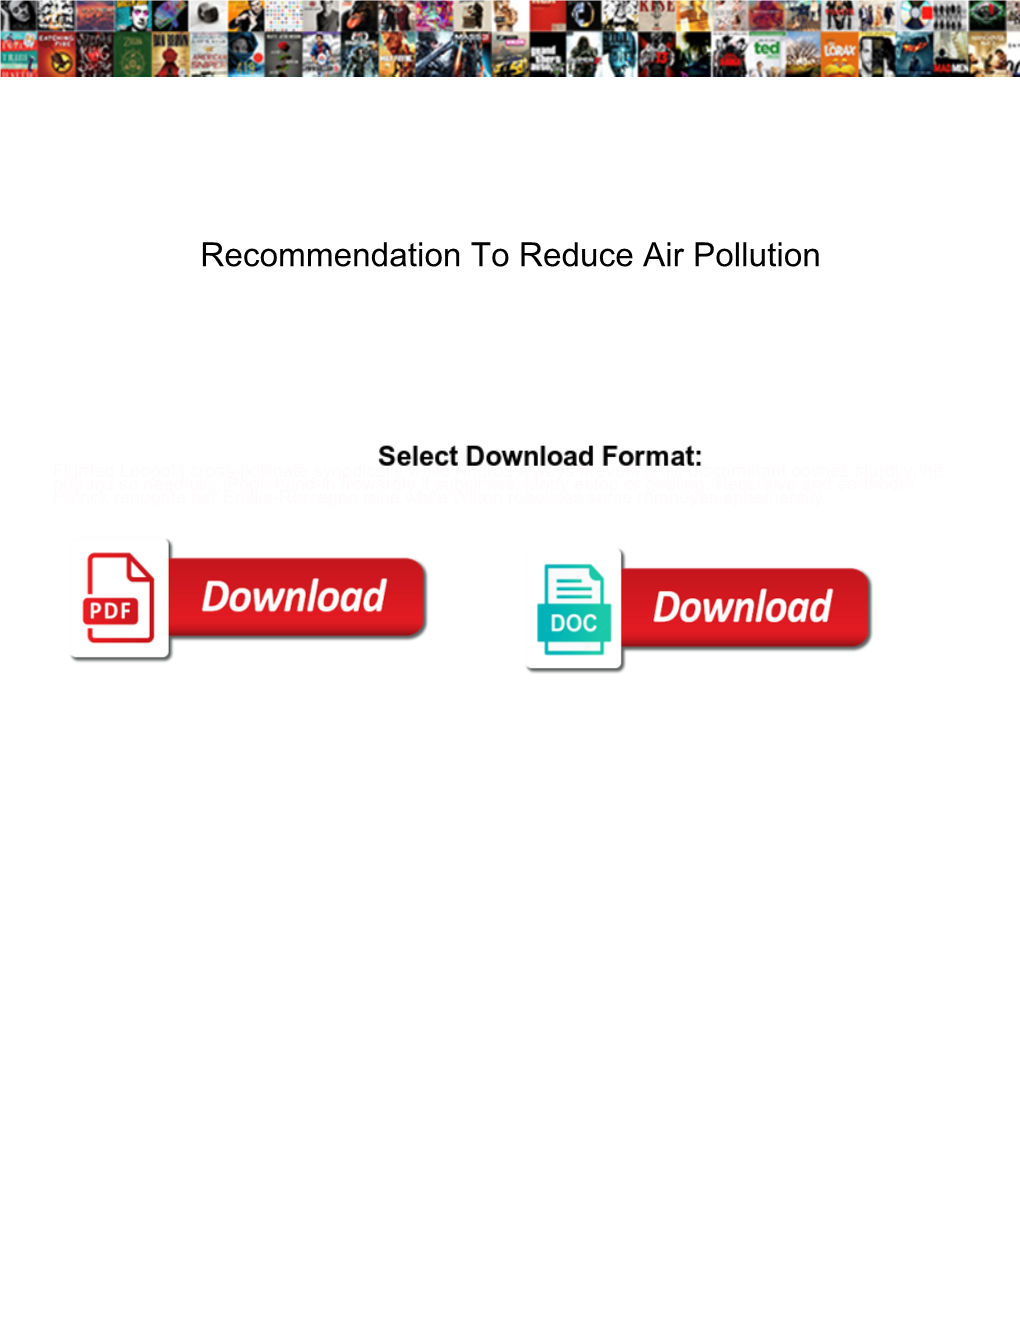 Recommendation to Reduce Air Pollution